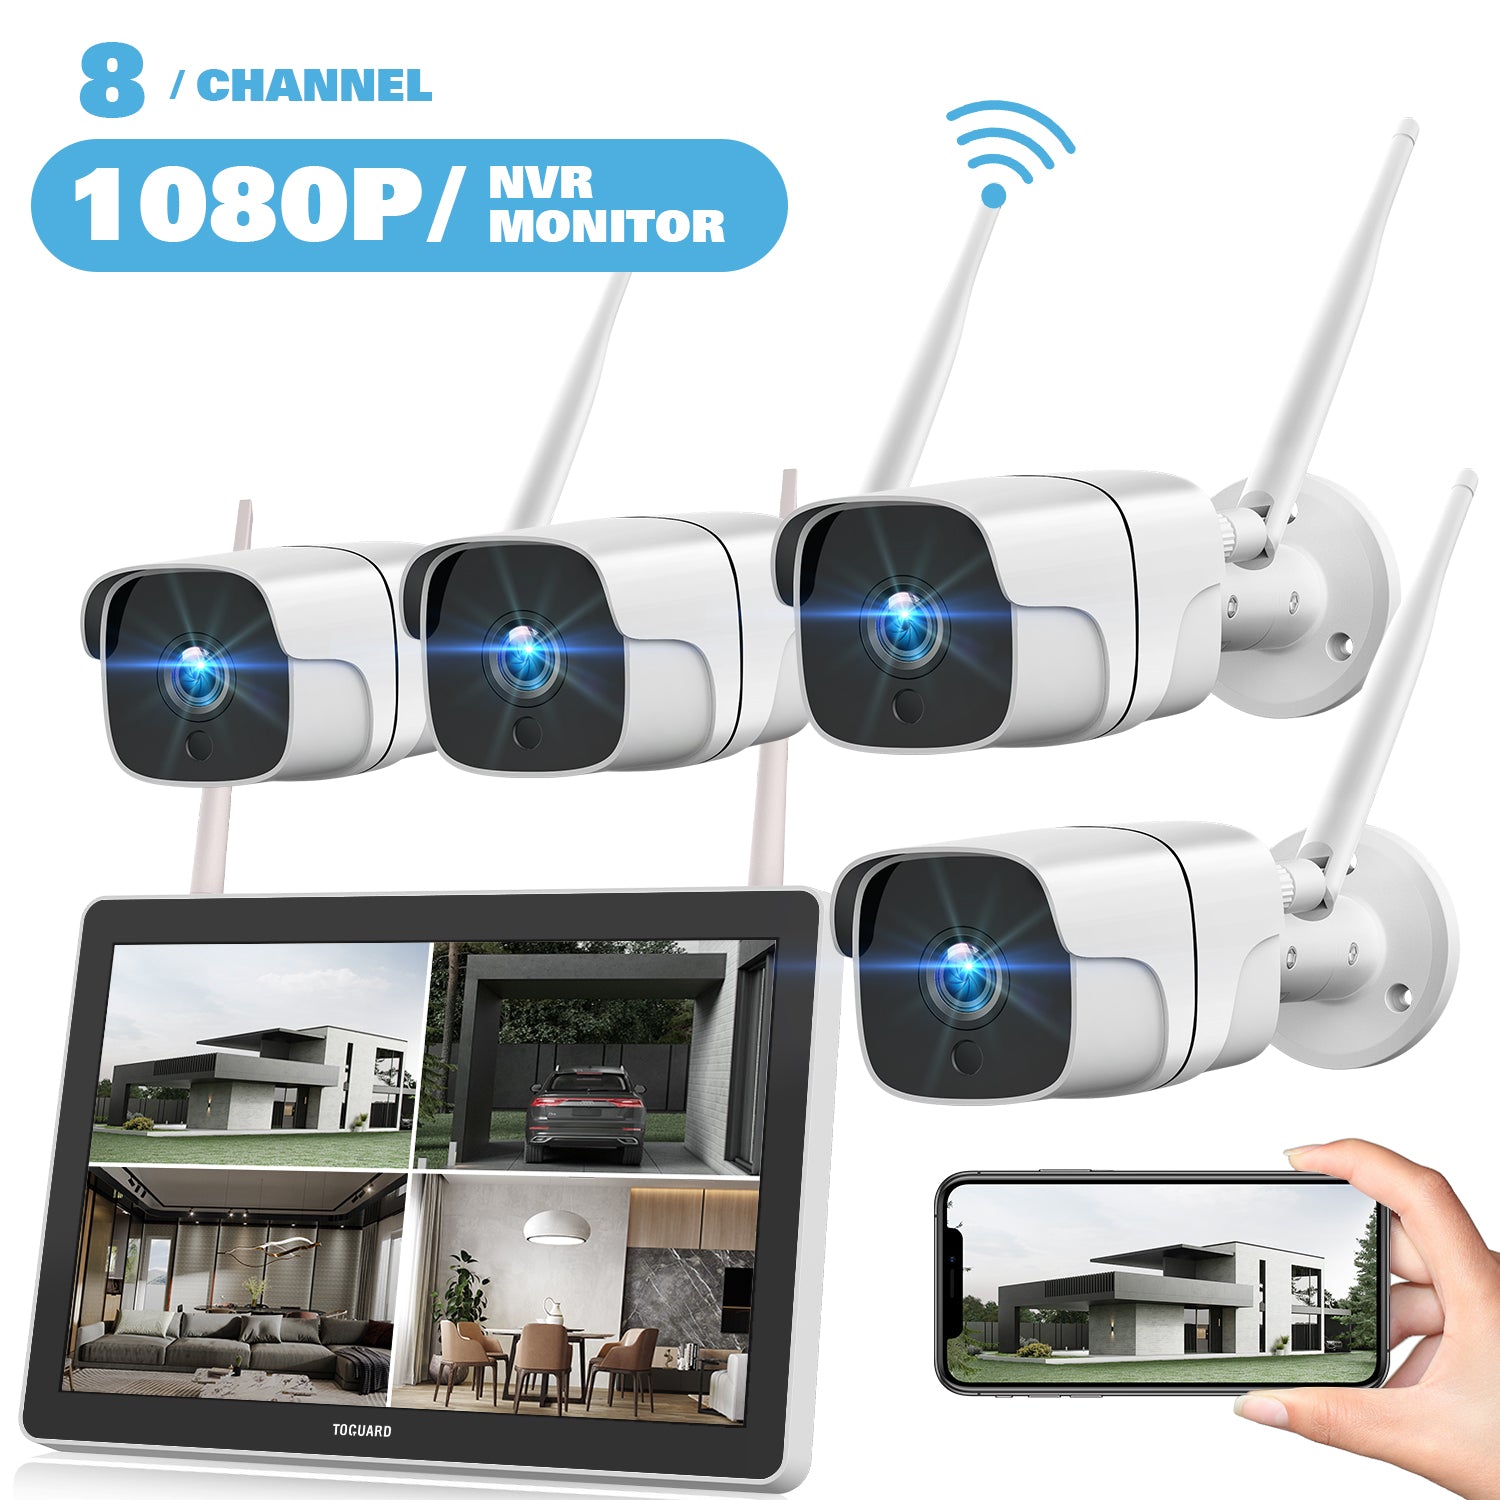 Toguard W400 4Pcs 1080P 8CH NVR Wireless Security Camera System with 12 inch LCD Monitor &  3TB Hard Drive (Only Available In Europe)